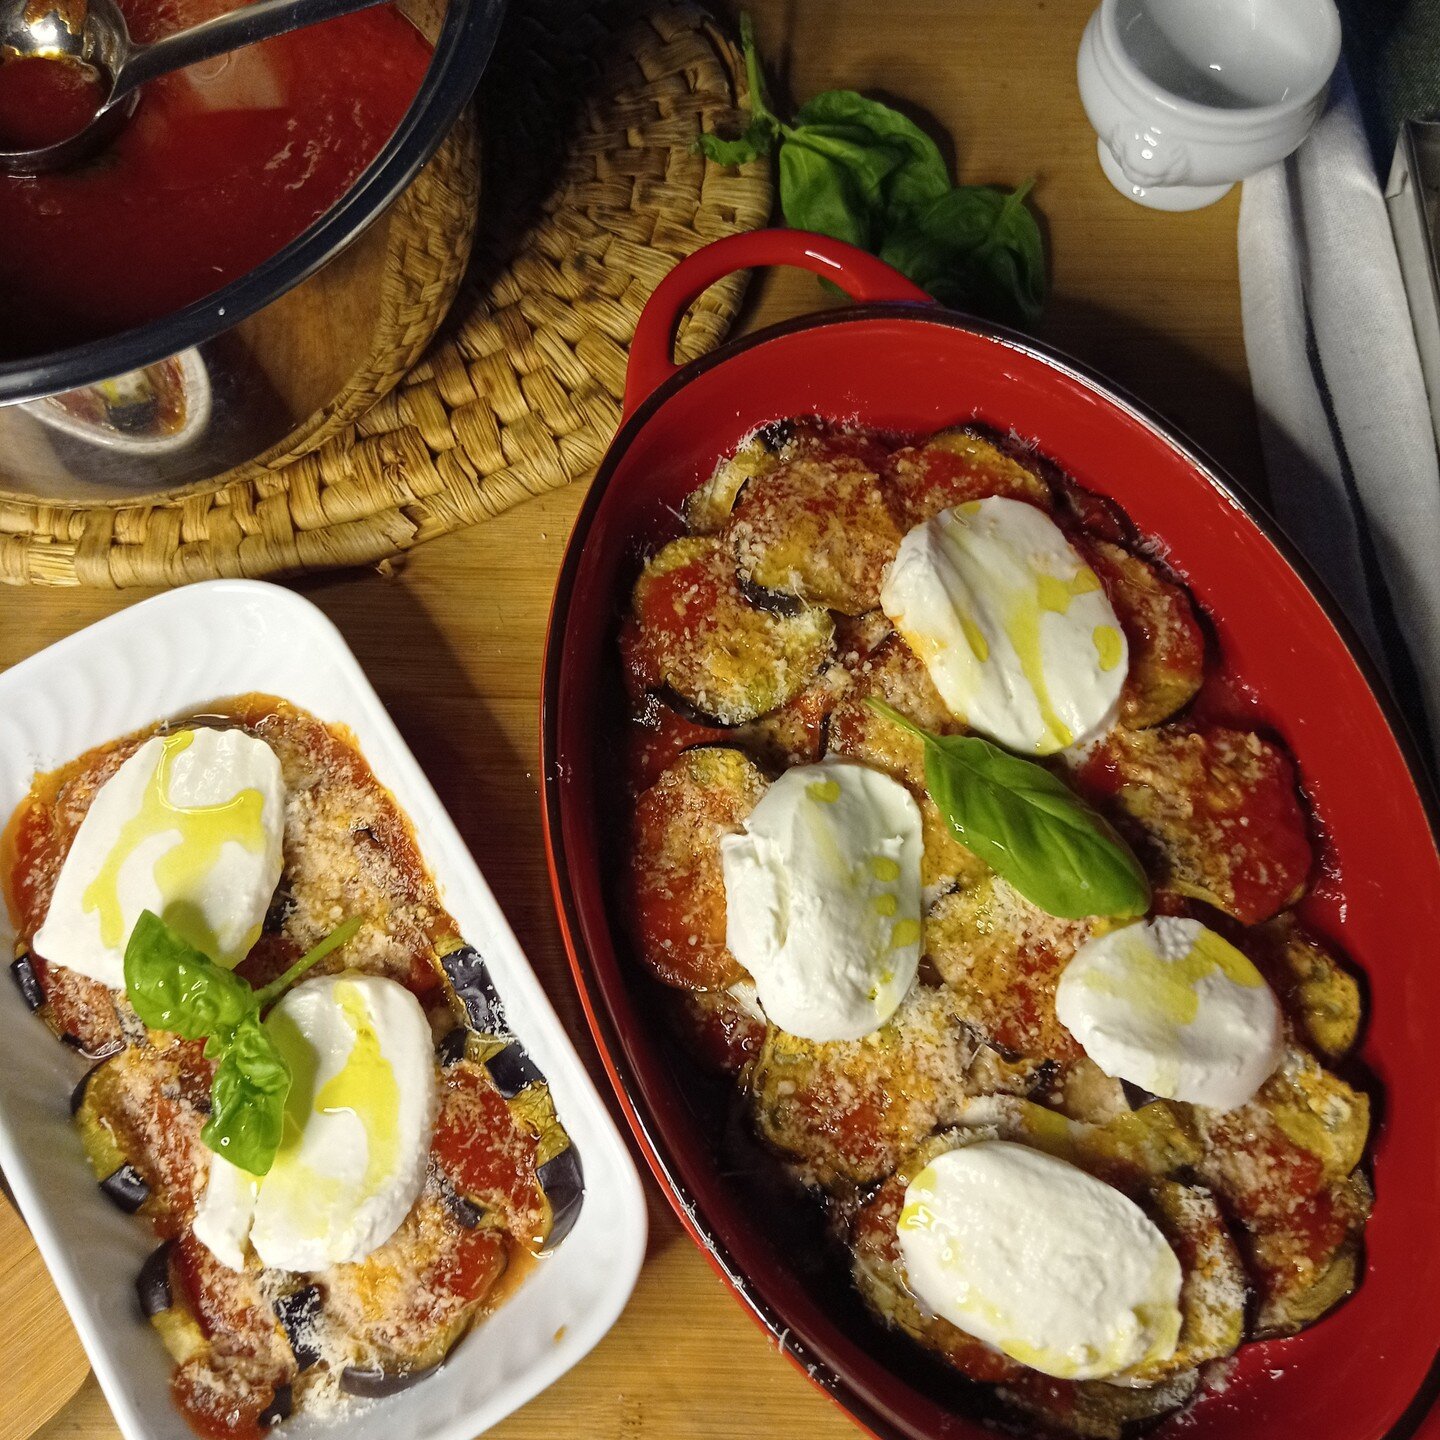 Eggplant #Parmigiana is one of the most famous #recipe of the #Italiancuisine. Each region has its own version. This particular one is made of grilled and not fried eggplants. A lighter yet amazingly delicious #firstcourse. #eatrealfood #healthylifes